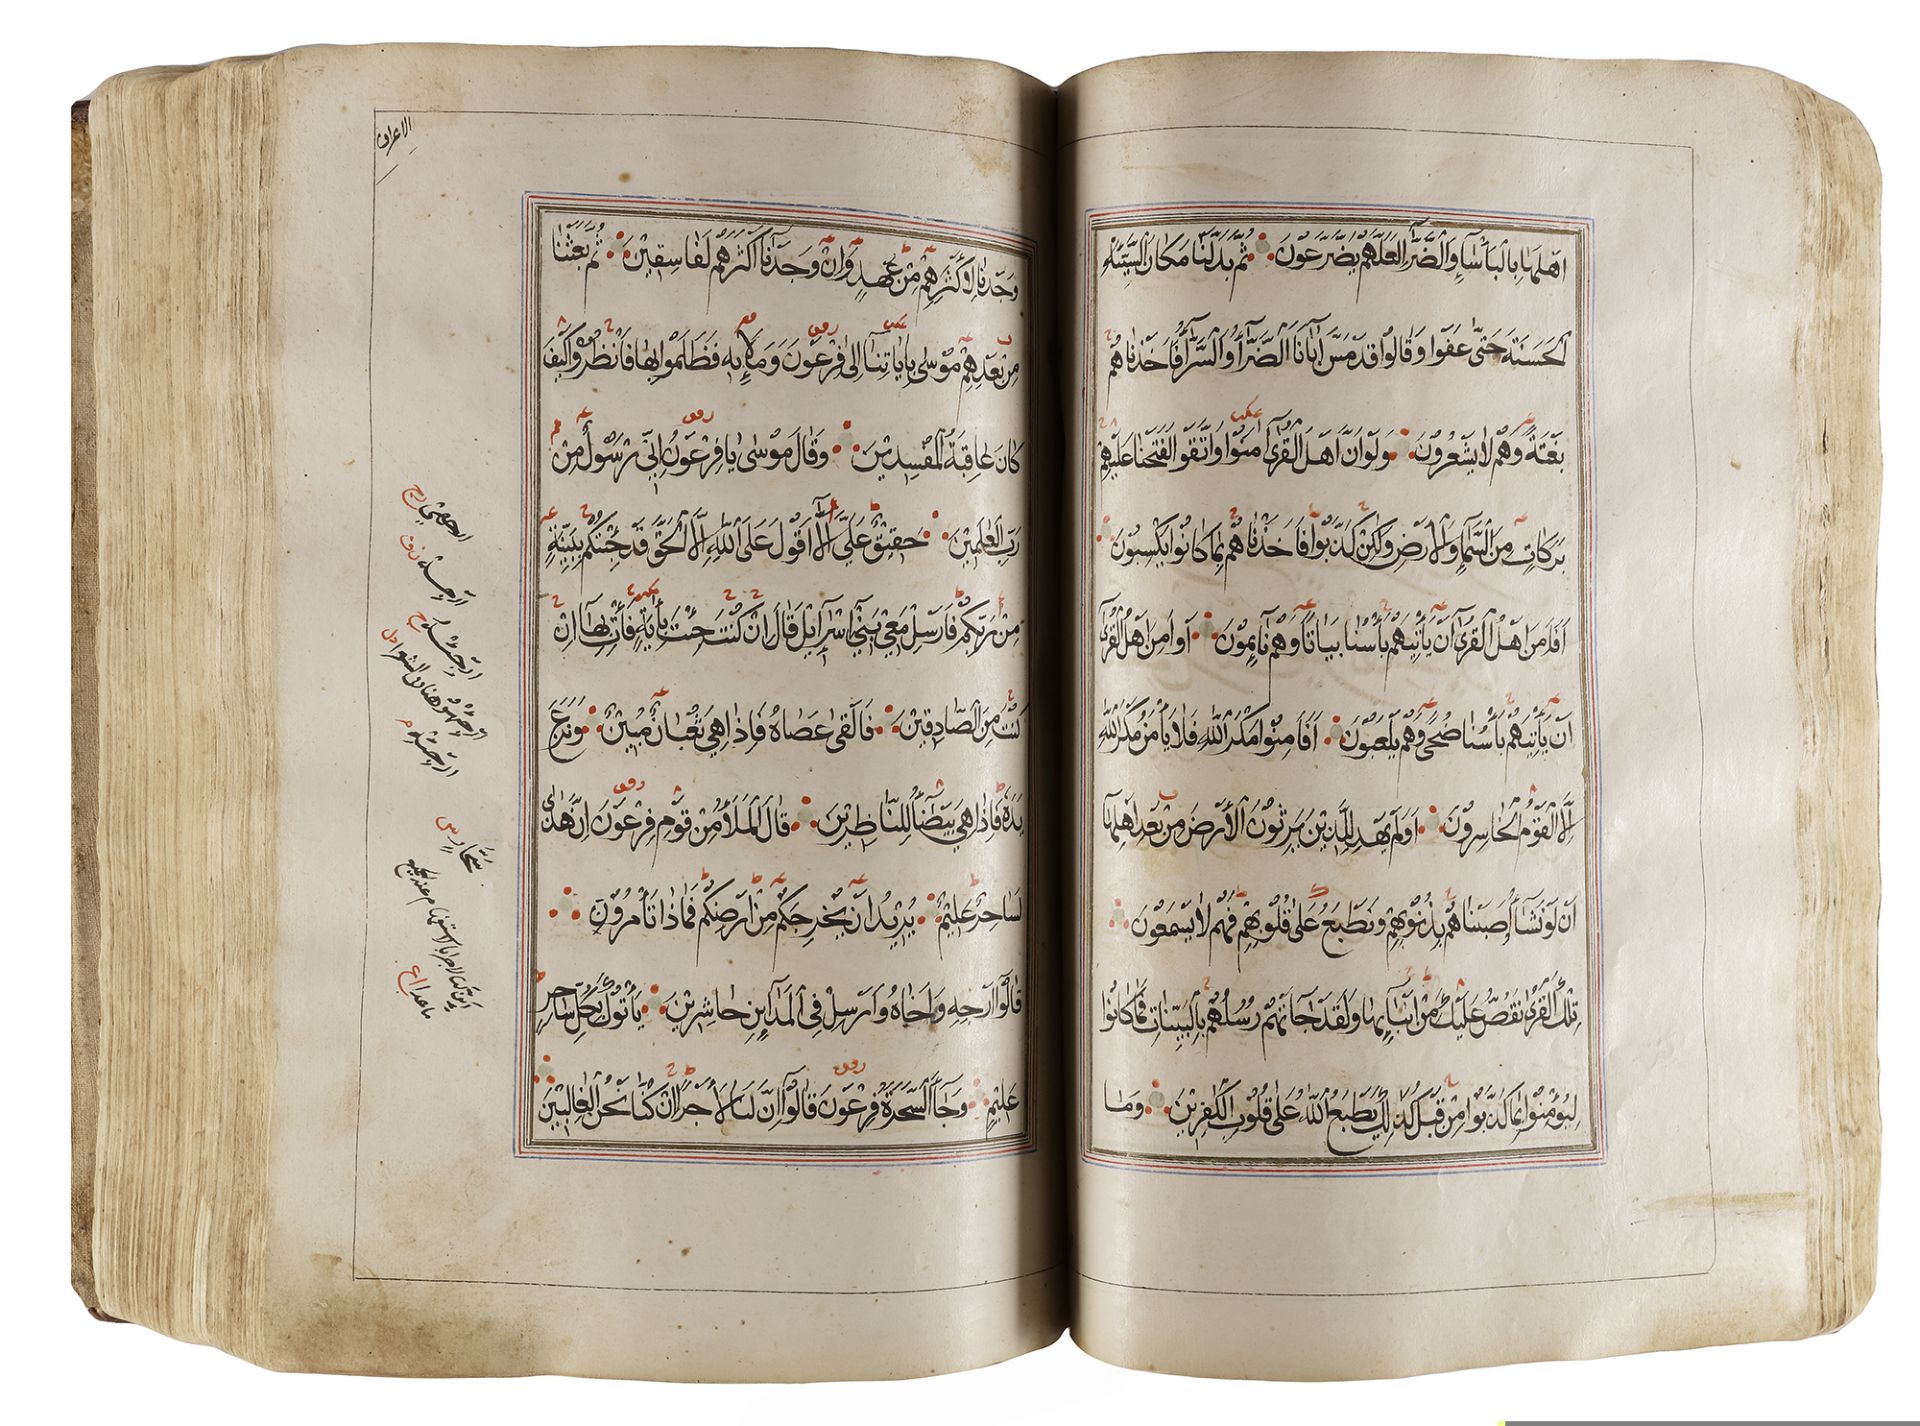 AN ILLUMINATED QURAN, YEMEN, BY AHMED QASEM IBN ISMAIL IN 1035 AH/1626 AD - Image 7 of 18